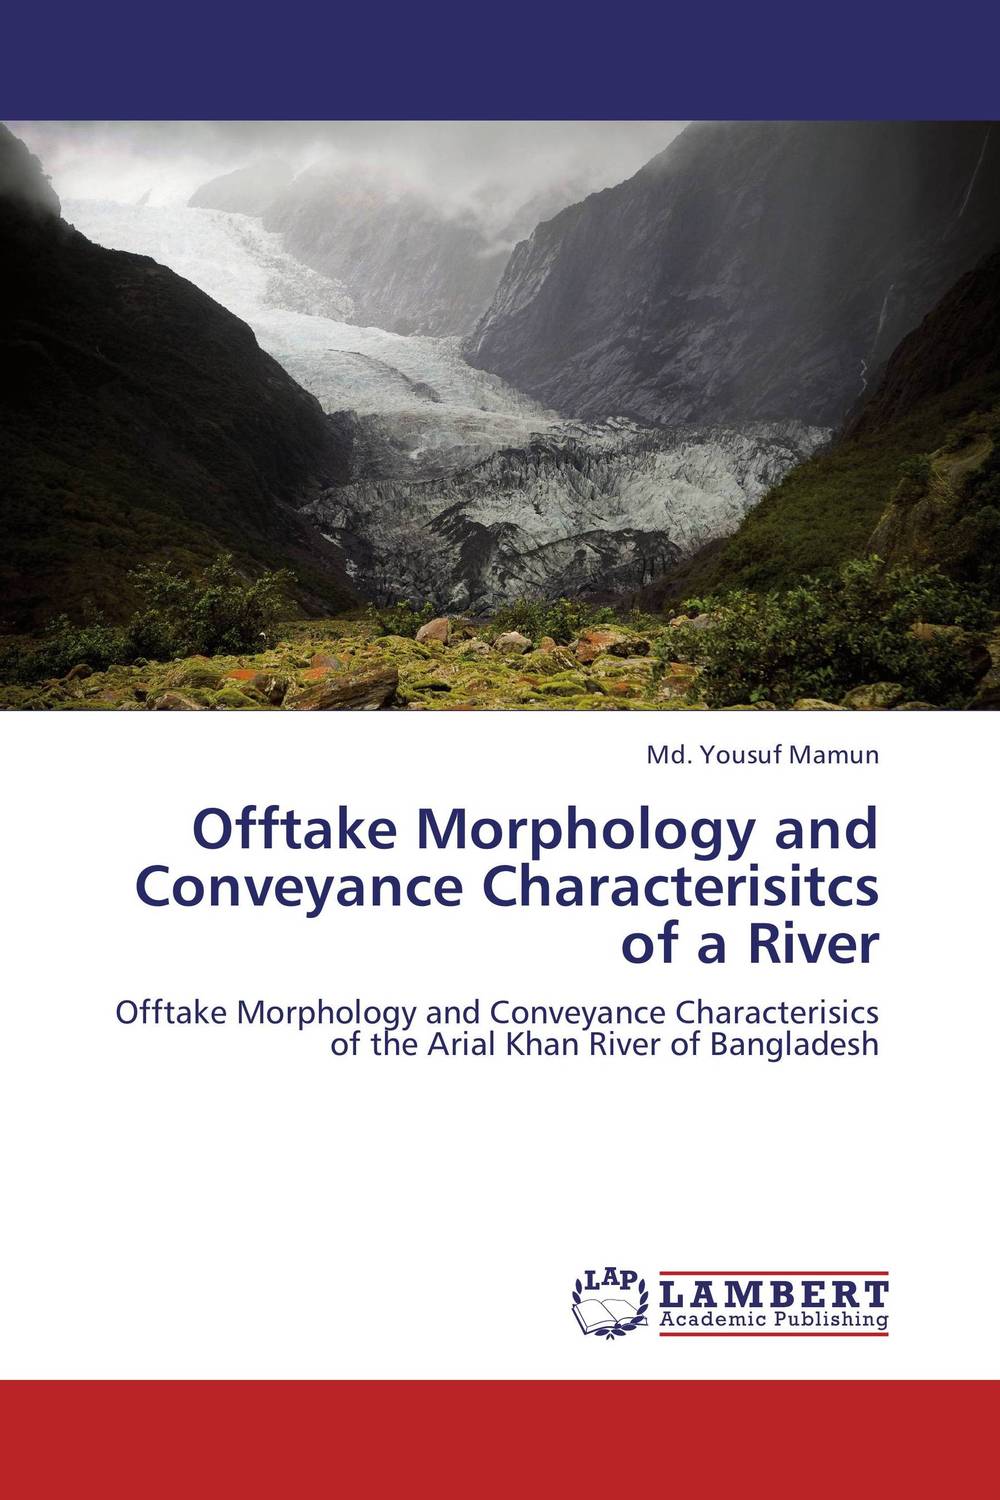 Offtake Morphology and Conveyance Characterisitcs of a River